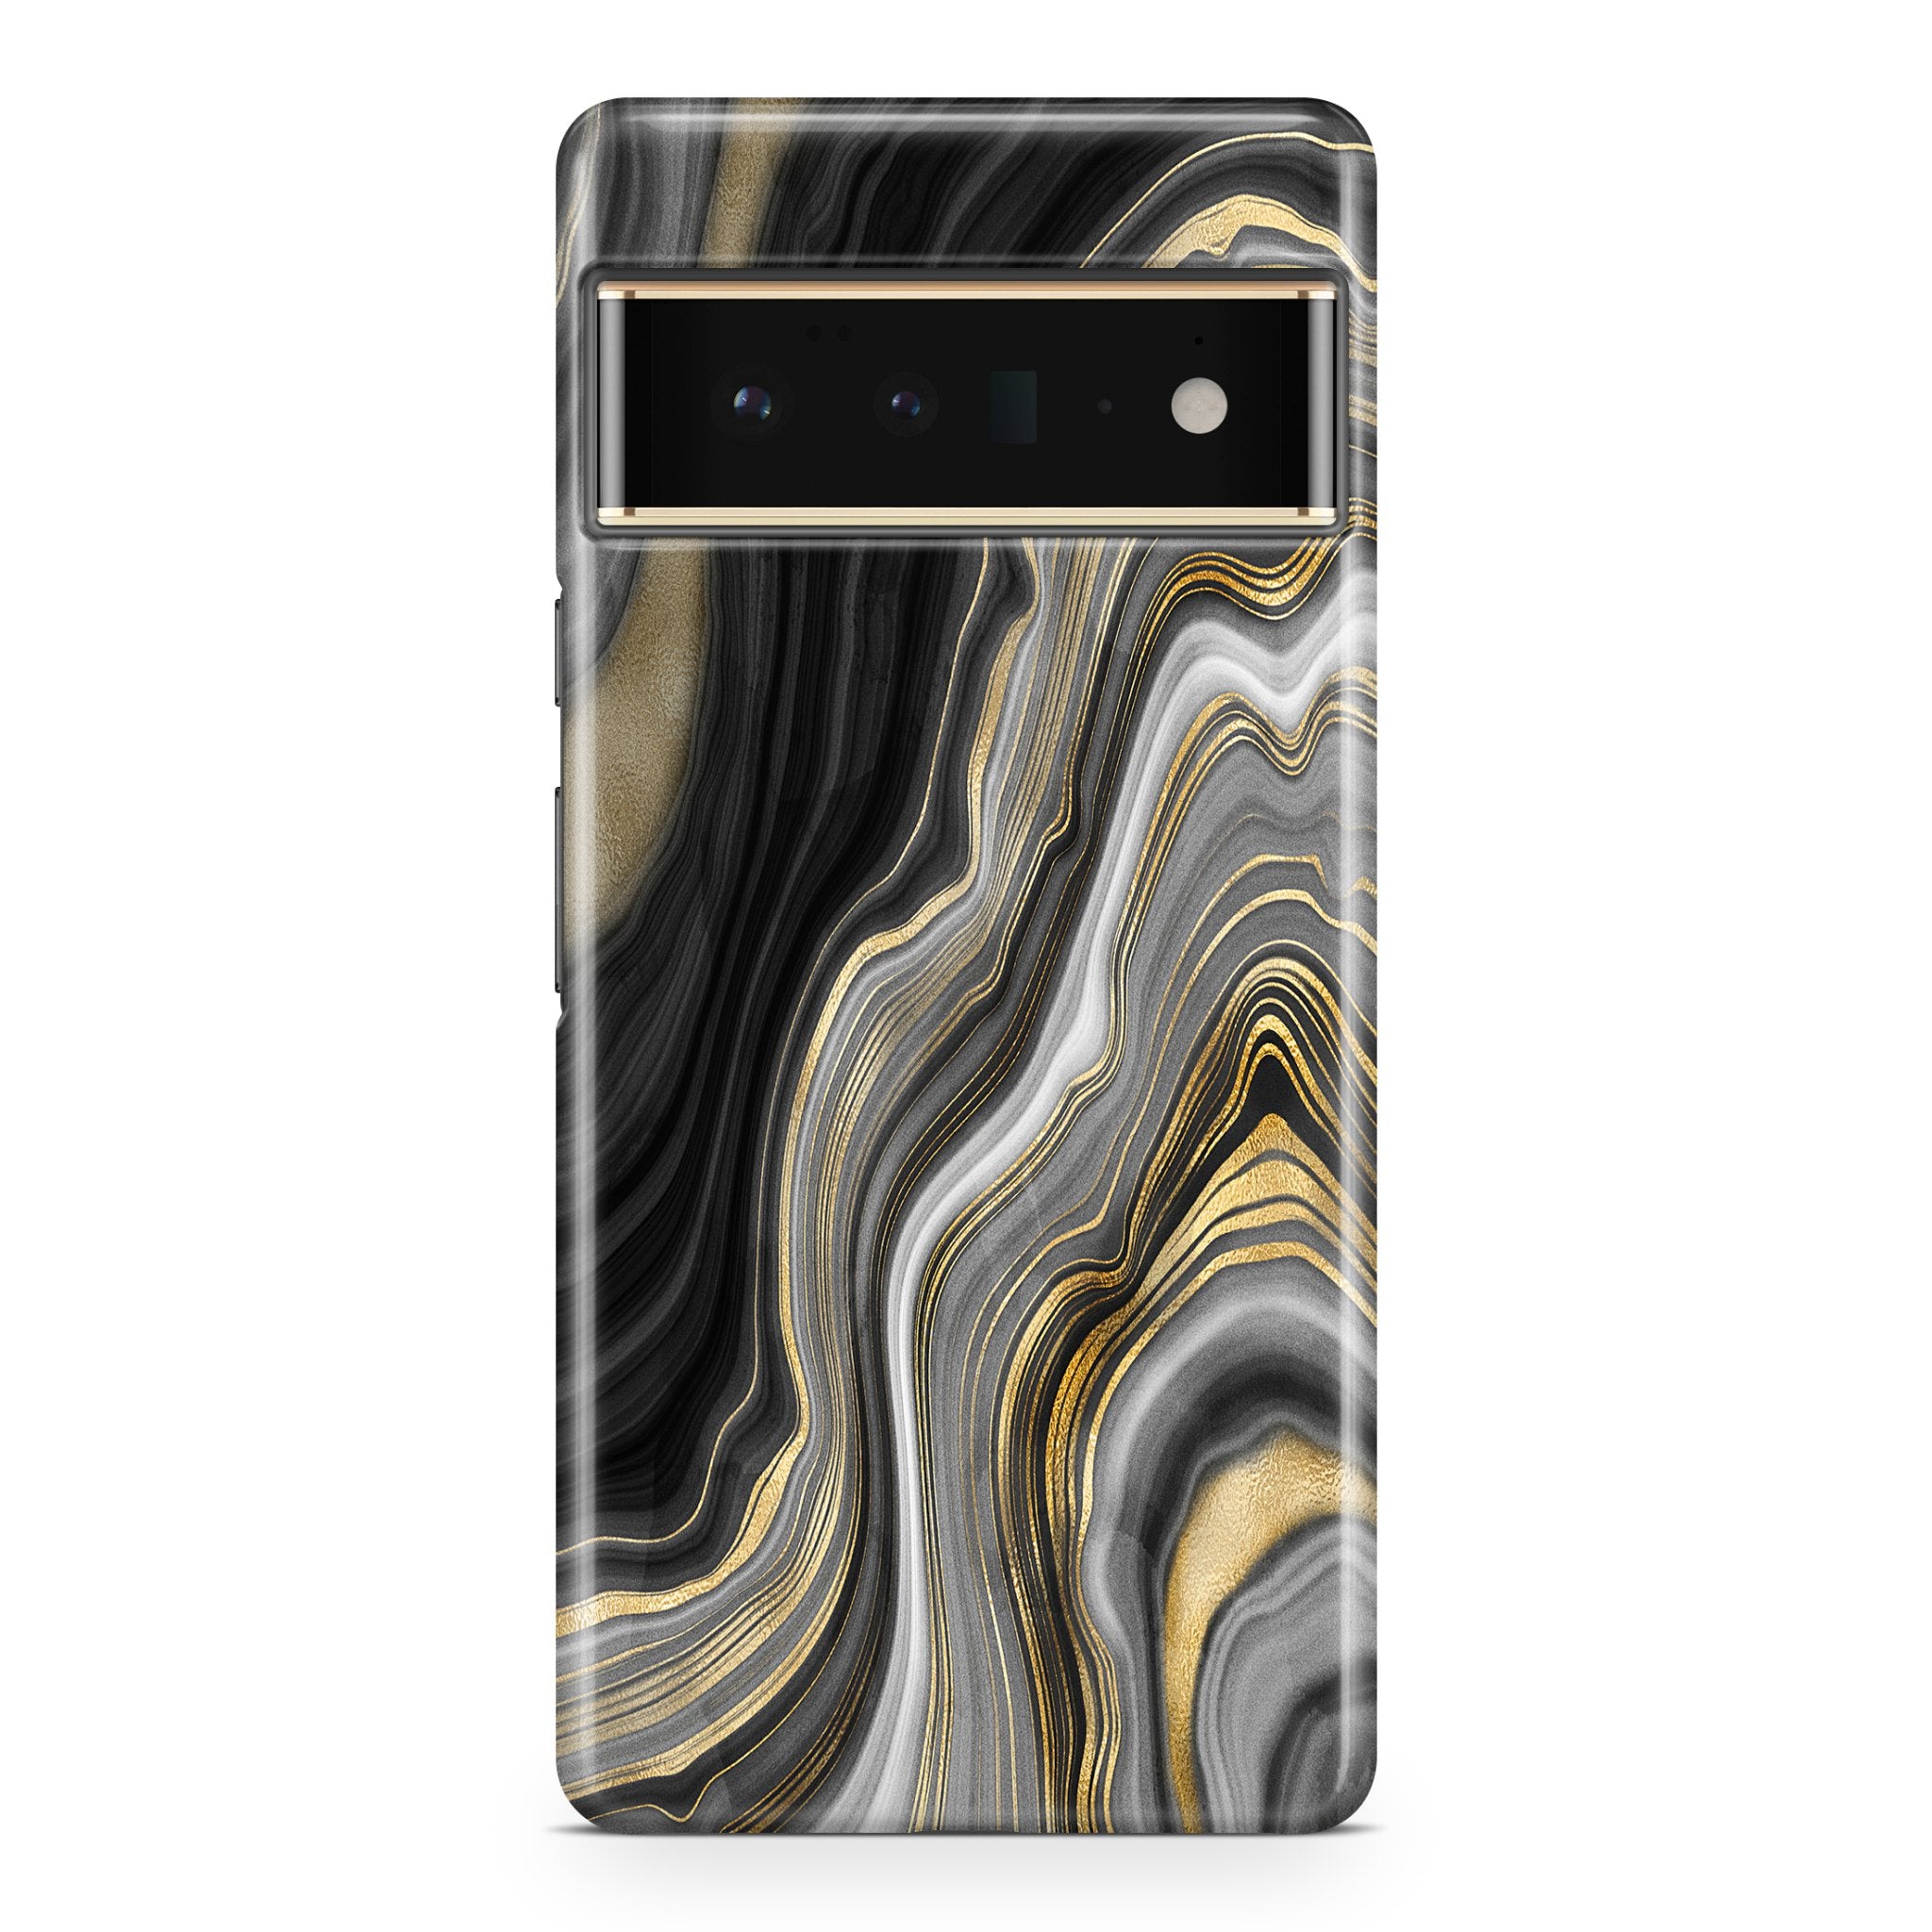 Black & Gold Agate I - Google phone case designs by CaseSwagger